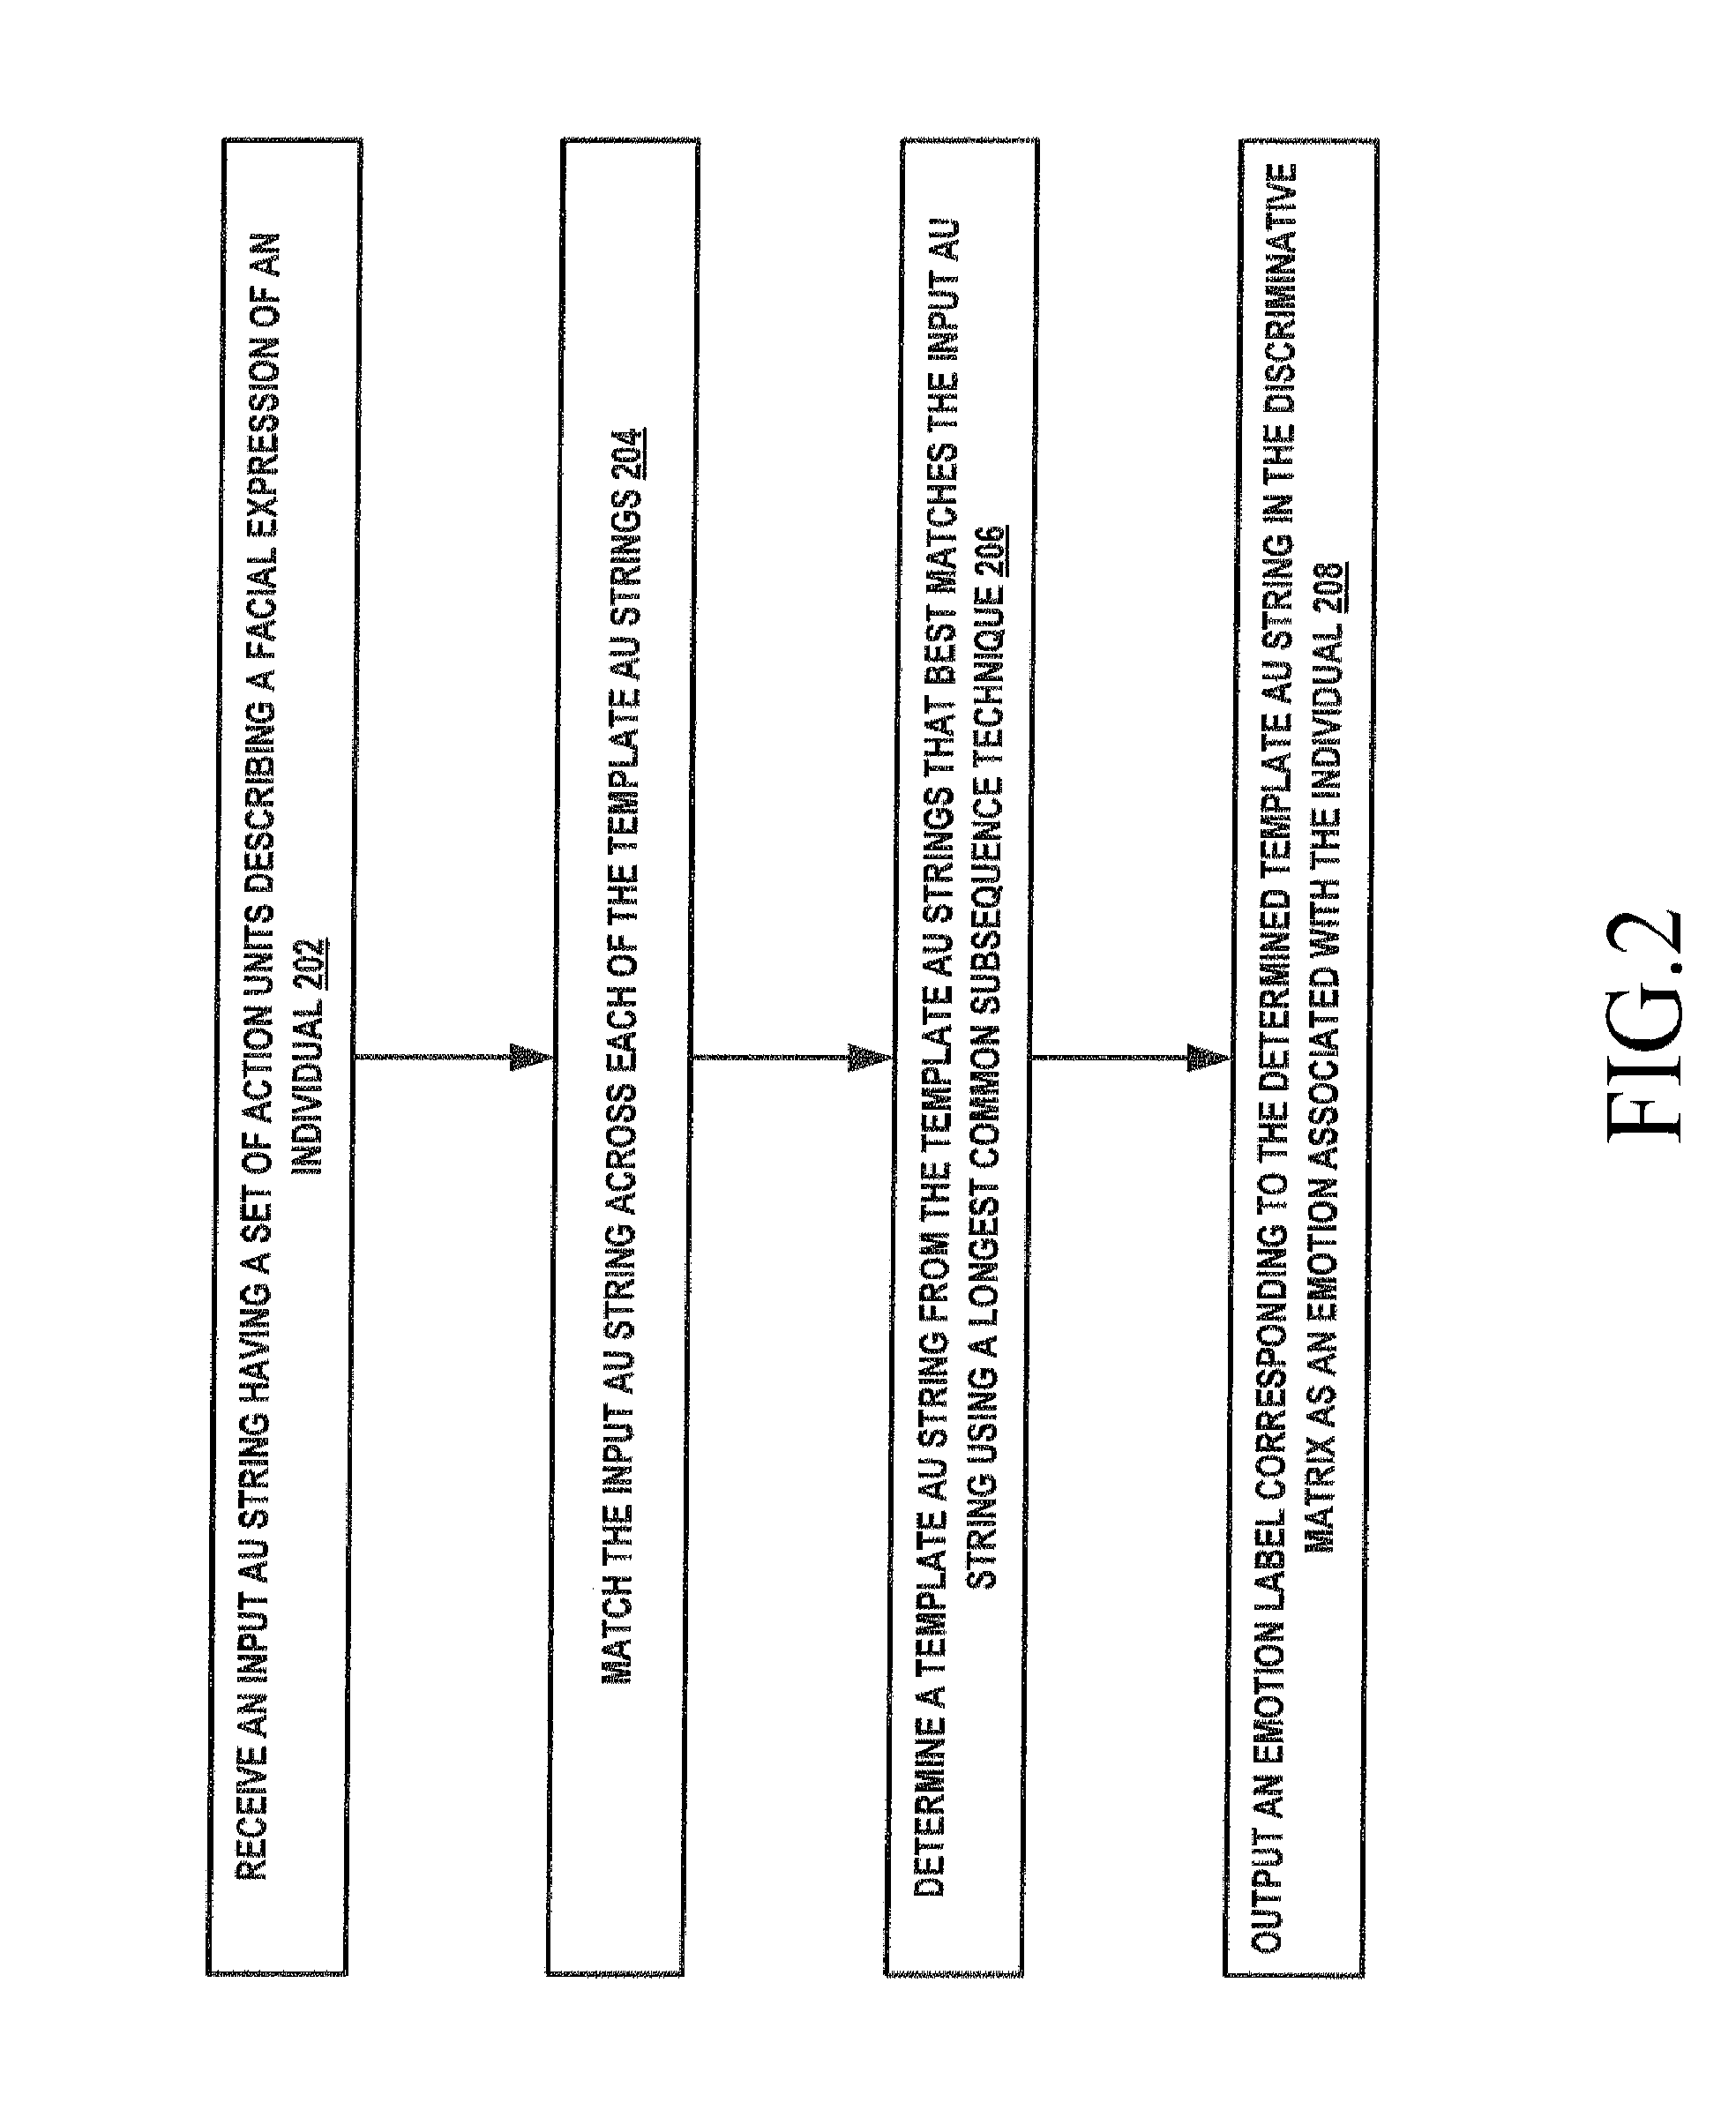 Method and apparatus for recognizing an emotion of an individual based on facial action units